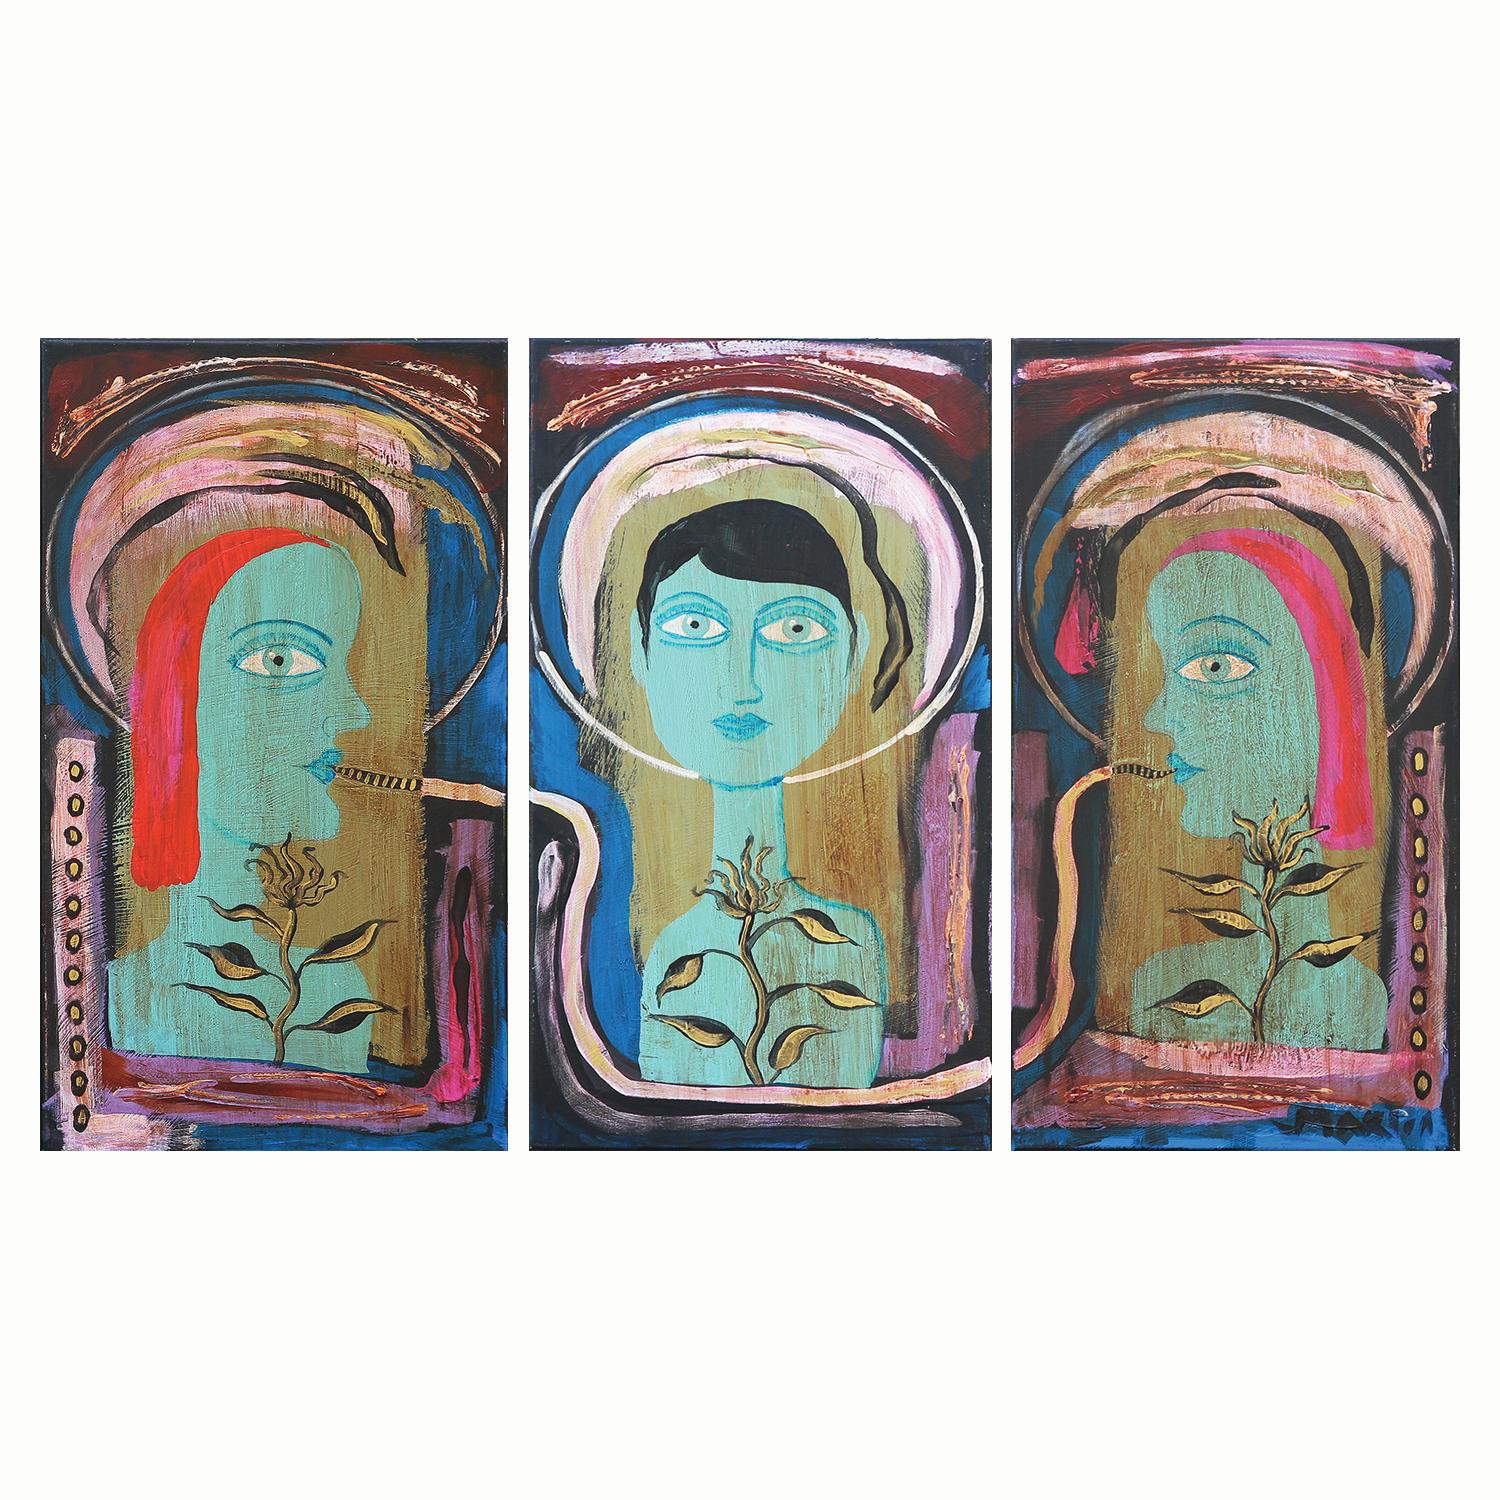 Larry Martin Figurative Painting - Contemporary Abstract Teal, Blue & Pink Hookah Smoking Figures Triptych Painting